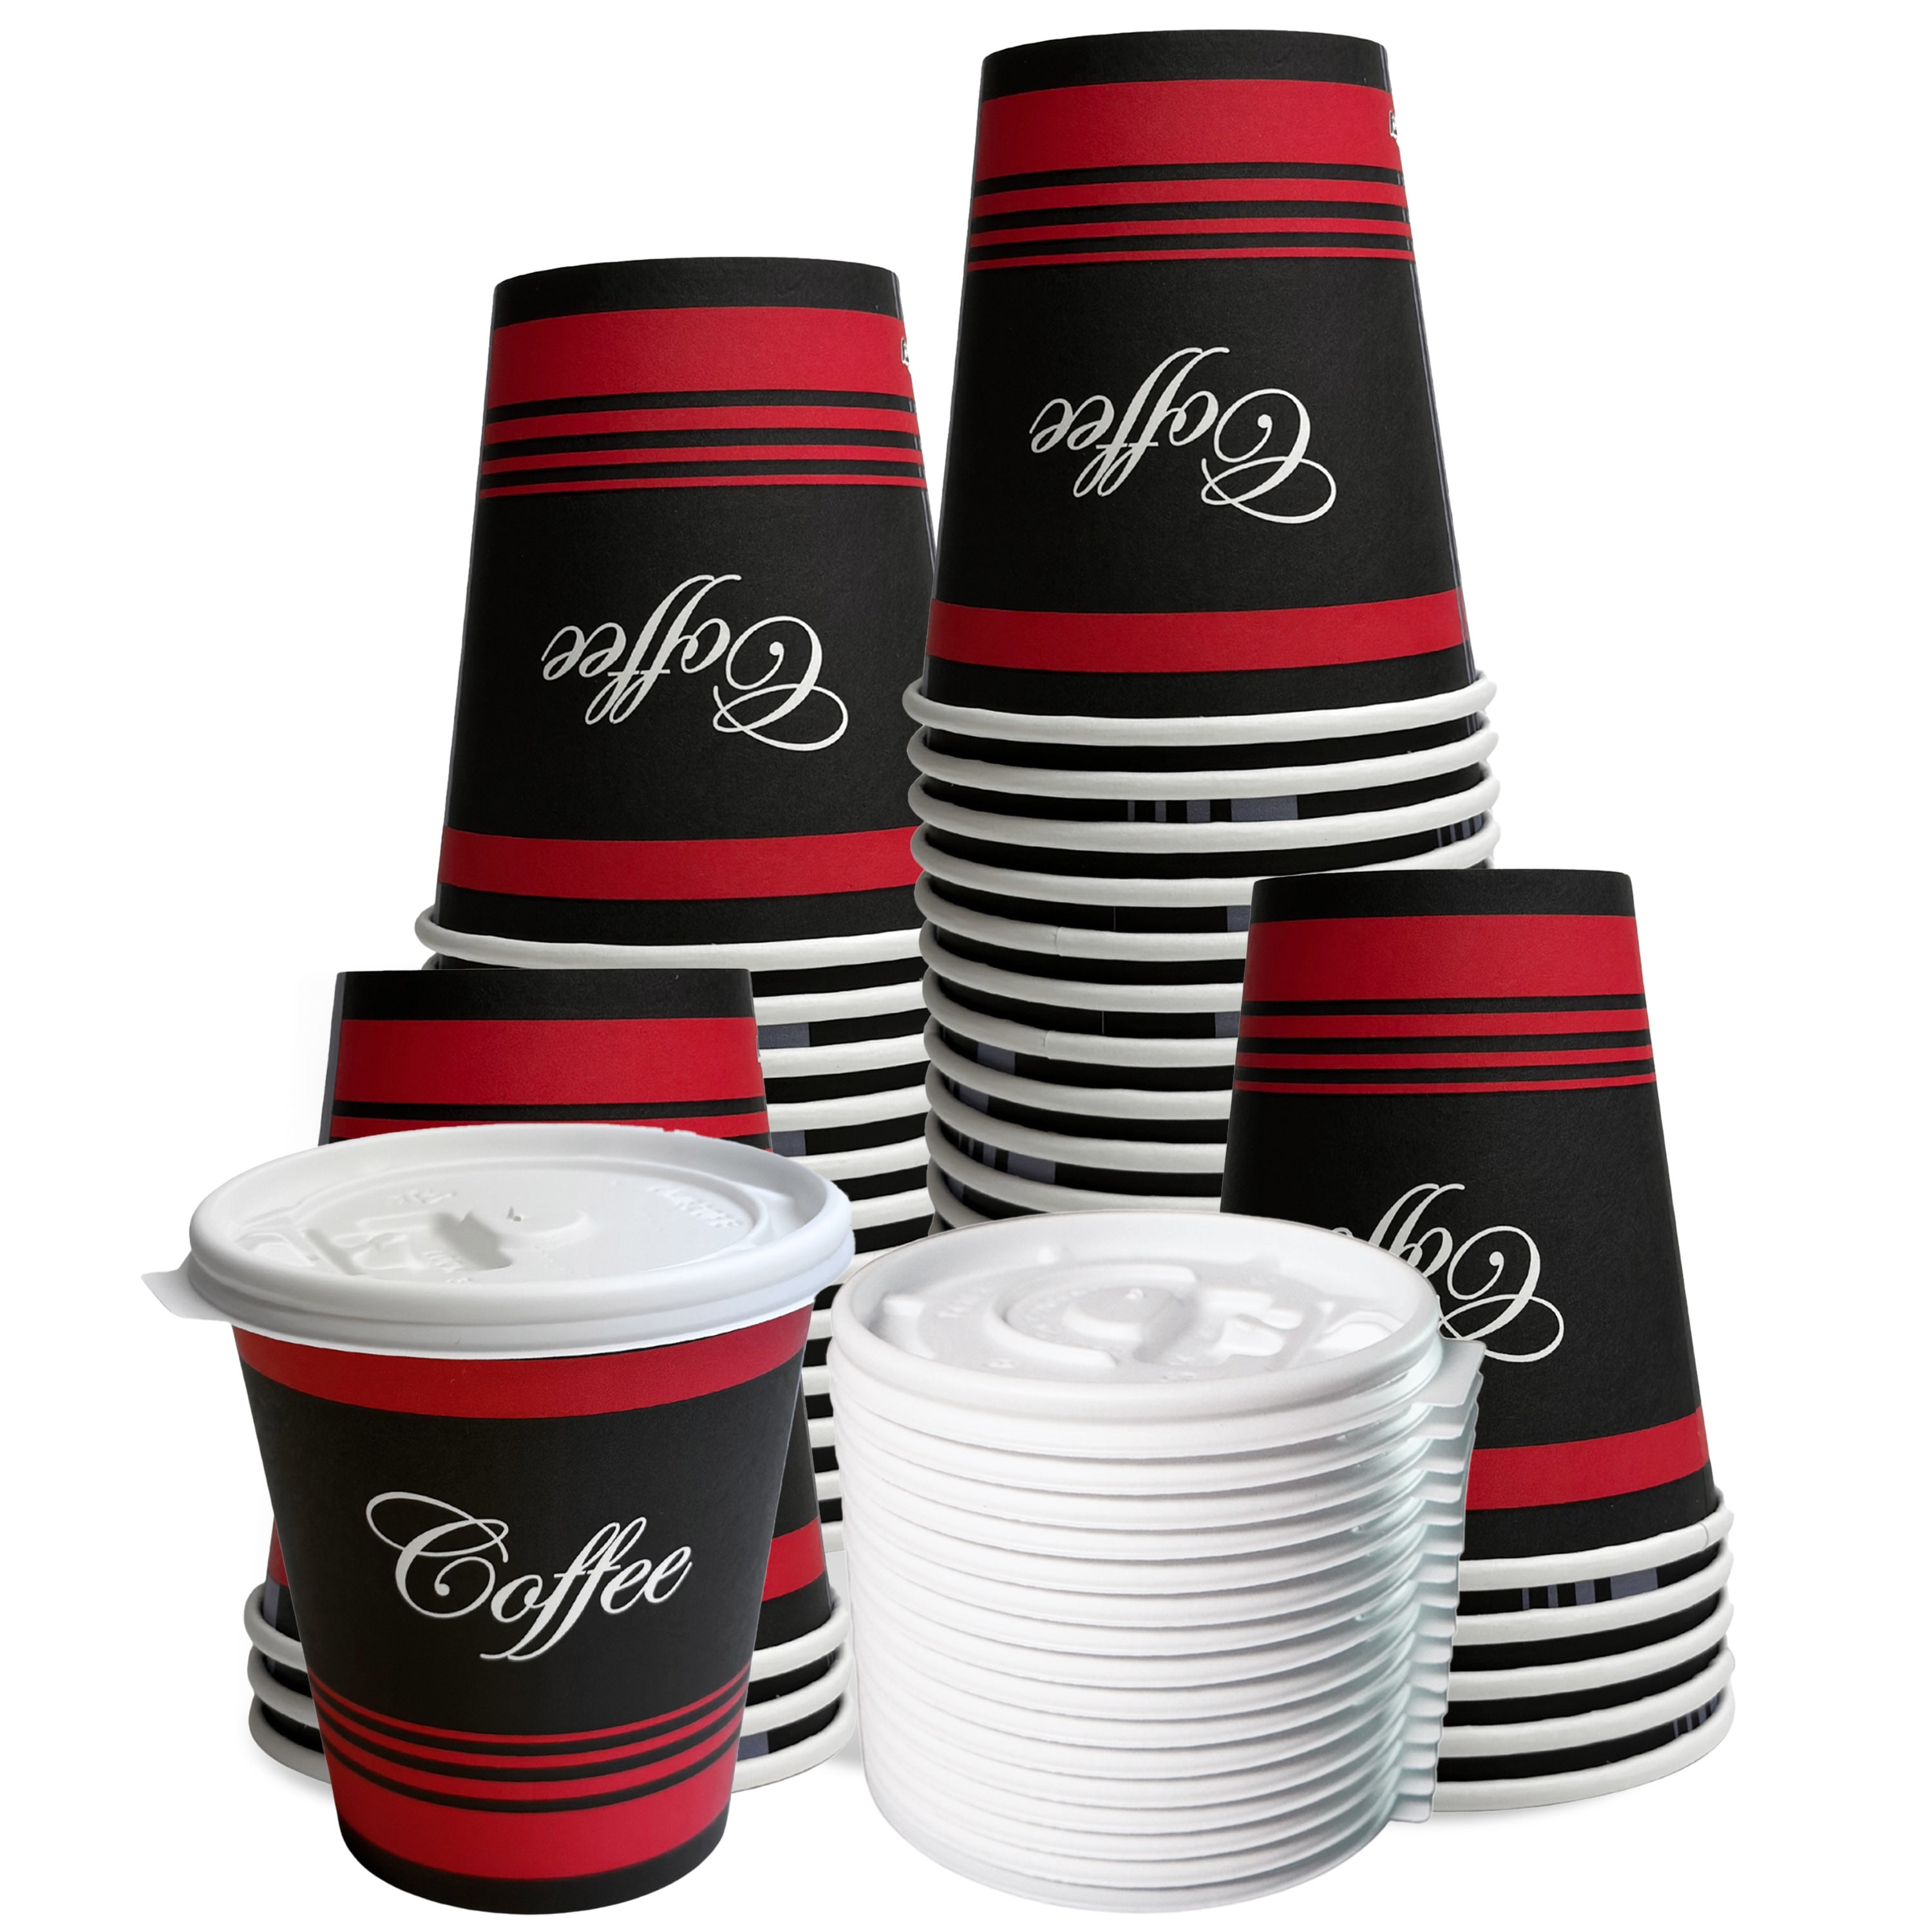 [250 Pack] 8 oz Compostable Paper Cups with White Flat Lids - Biodegradable Disposable White Paper Coffee Cups PLA Lined - Eco-Friendly Hot and Cold